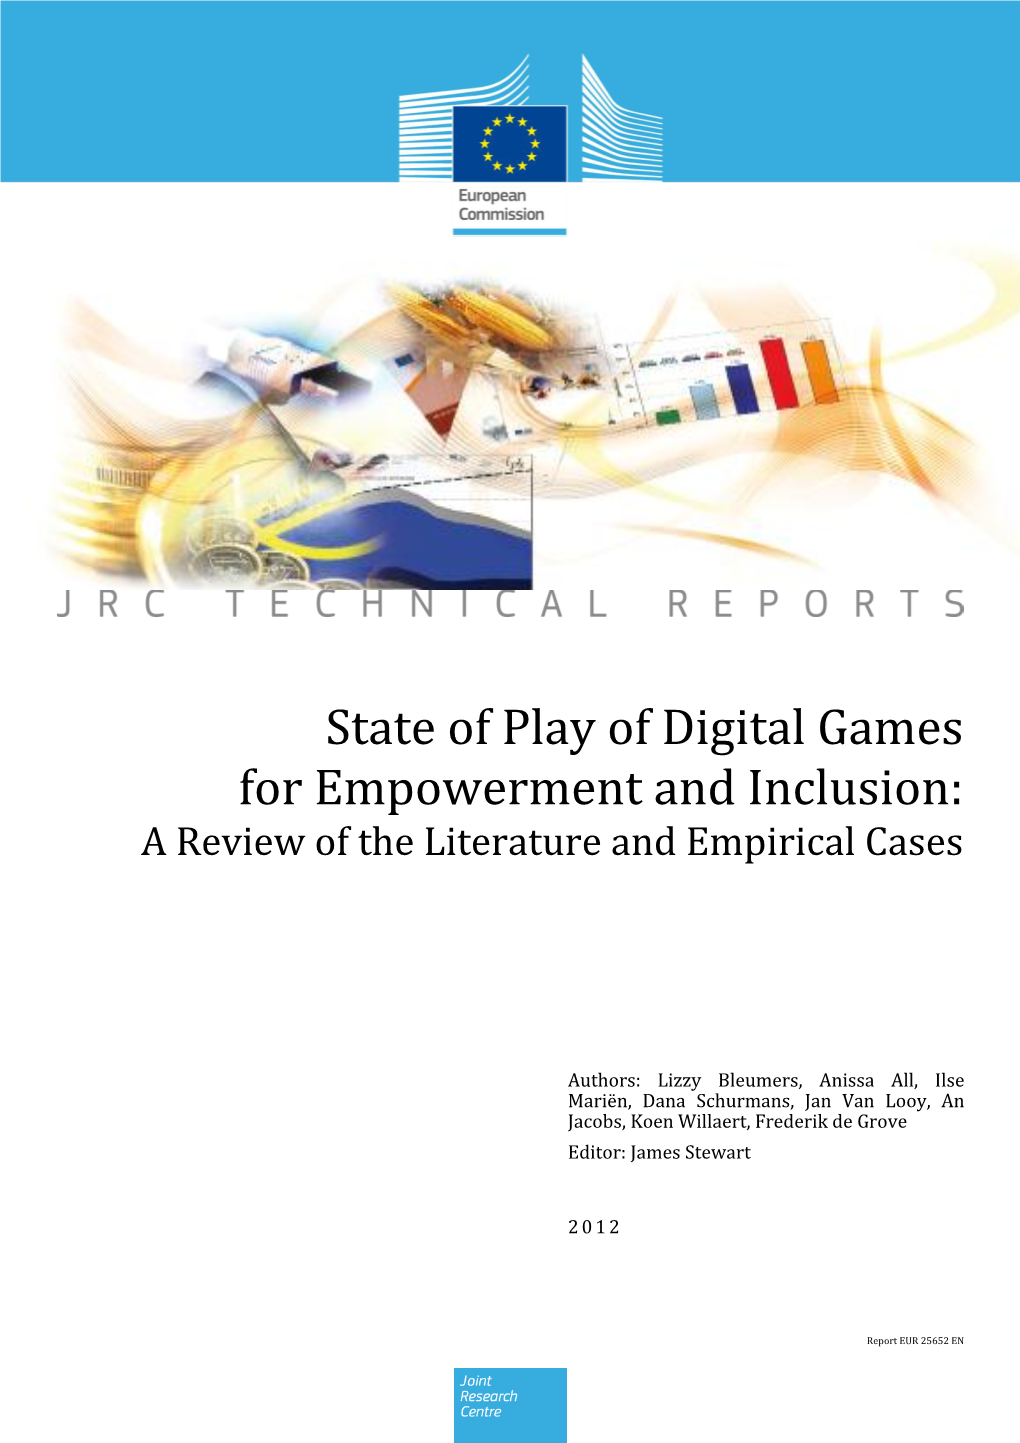 State of Play of Digital Games for Empowerment and Inclusion: a Review of the Literature and Empirical Cases